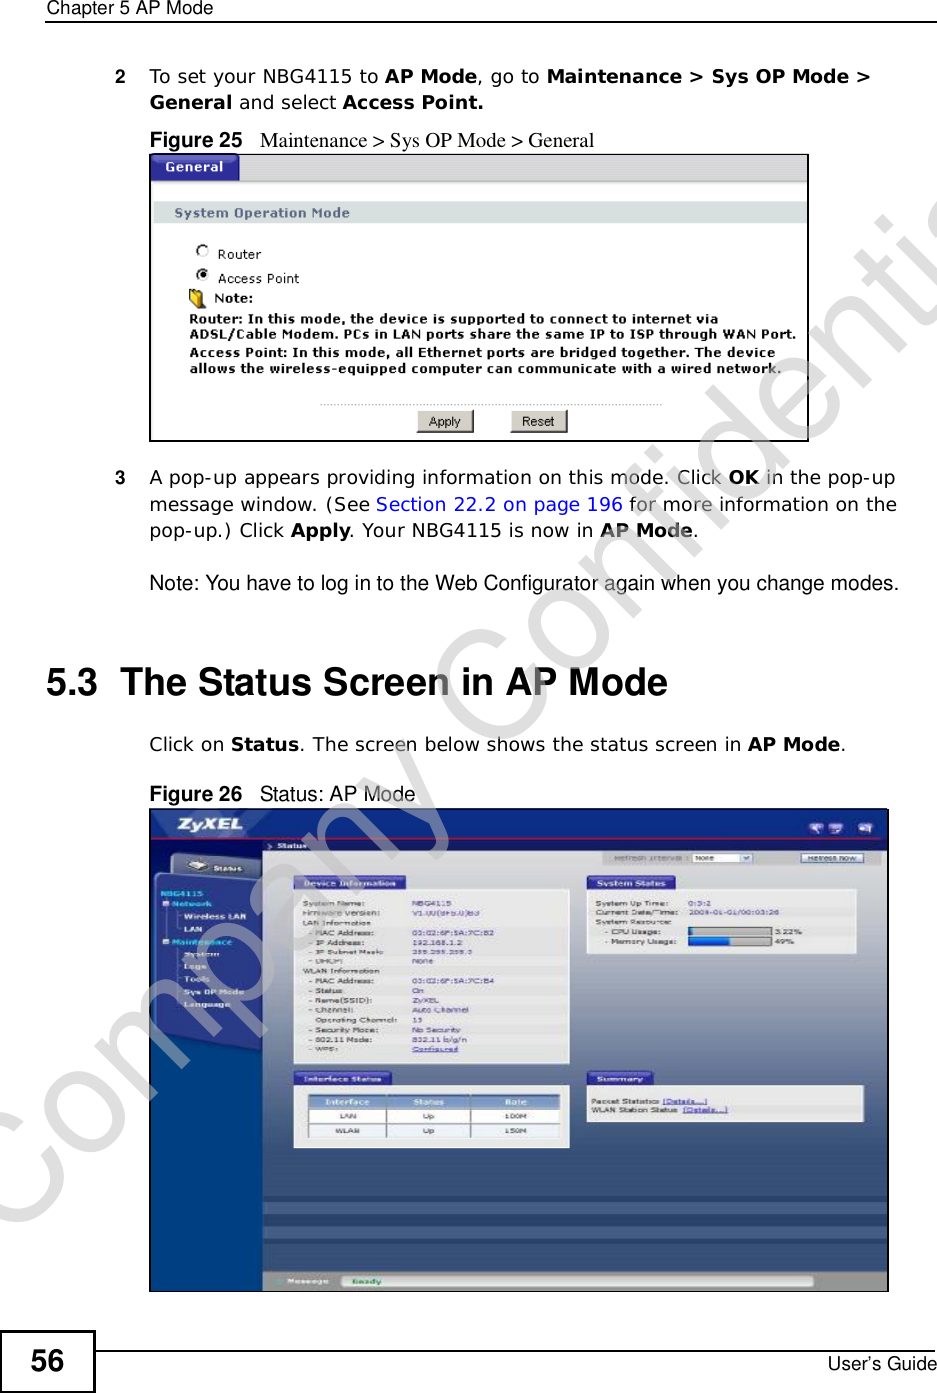 Chapter 5AP ModeUser’s Guide562To set your NBG4115 to AP Mode, go to Maintenance &gt; Sys OP Mode &gt; General and select Access Point.Figure 25   Maintenance &gt; Sys OP Mode &gt; General3A pop-up appears providing information on this mode. Click OK in the pop-up message window. (See Section 22.2 on page 196 for more information on the pop-up.) Click Apply. Your NBG4115 is now in AP Mode.Note: You have to log in to the Web Configurator again when you change modes.5.3  The Status Screen in AP ModeClick on Status. The screen below shows the status screen in AP Mode.Figure 26   Status: AP Mode Company Confidential